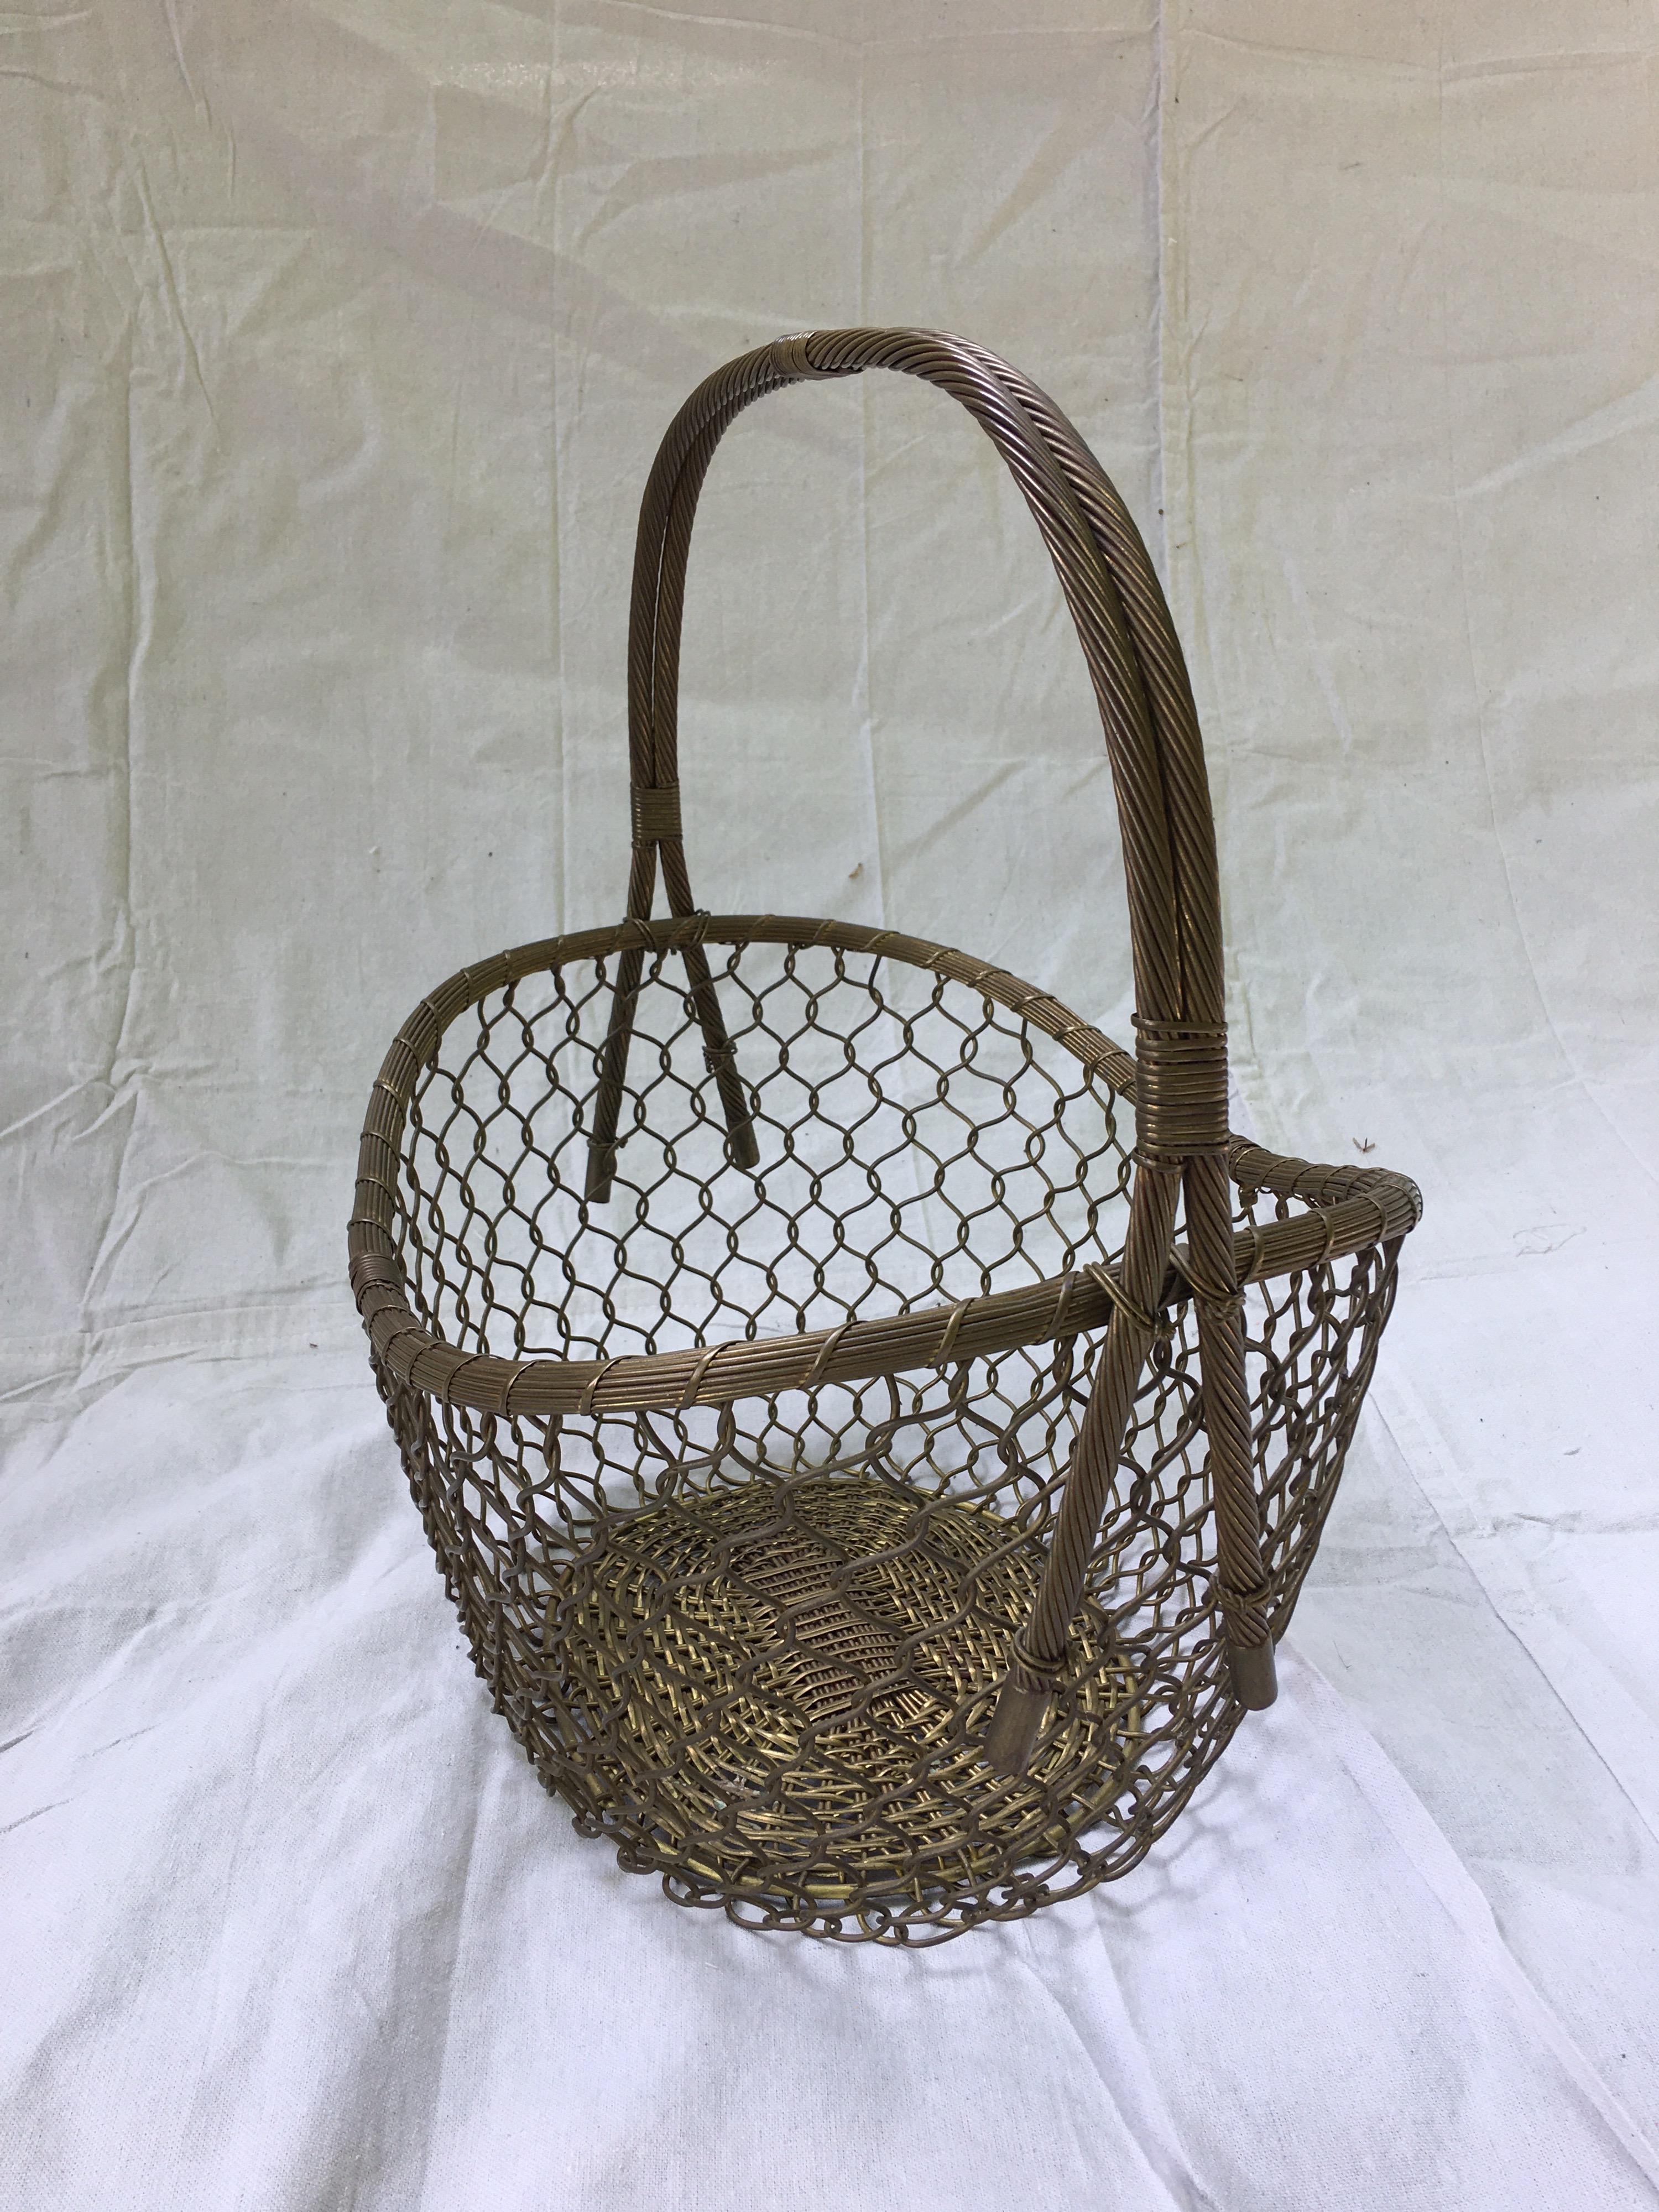 Well built woven brass basket. Nice weight, probably designed to be a magazine Basket. Possibly Italian.